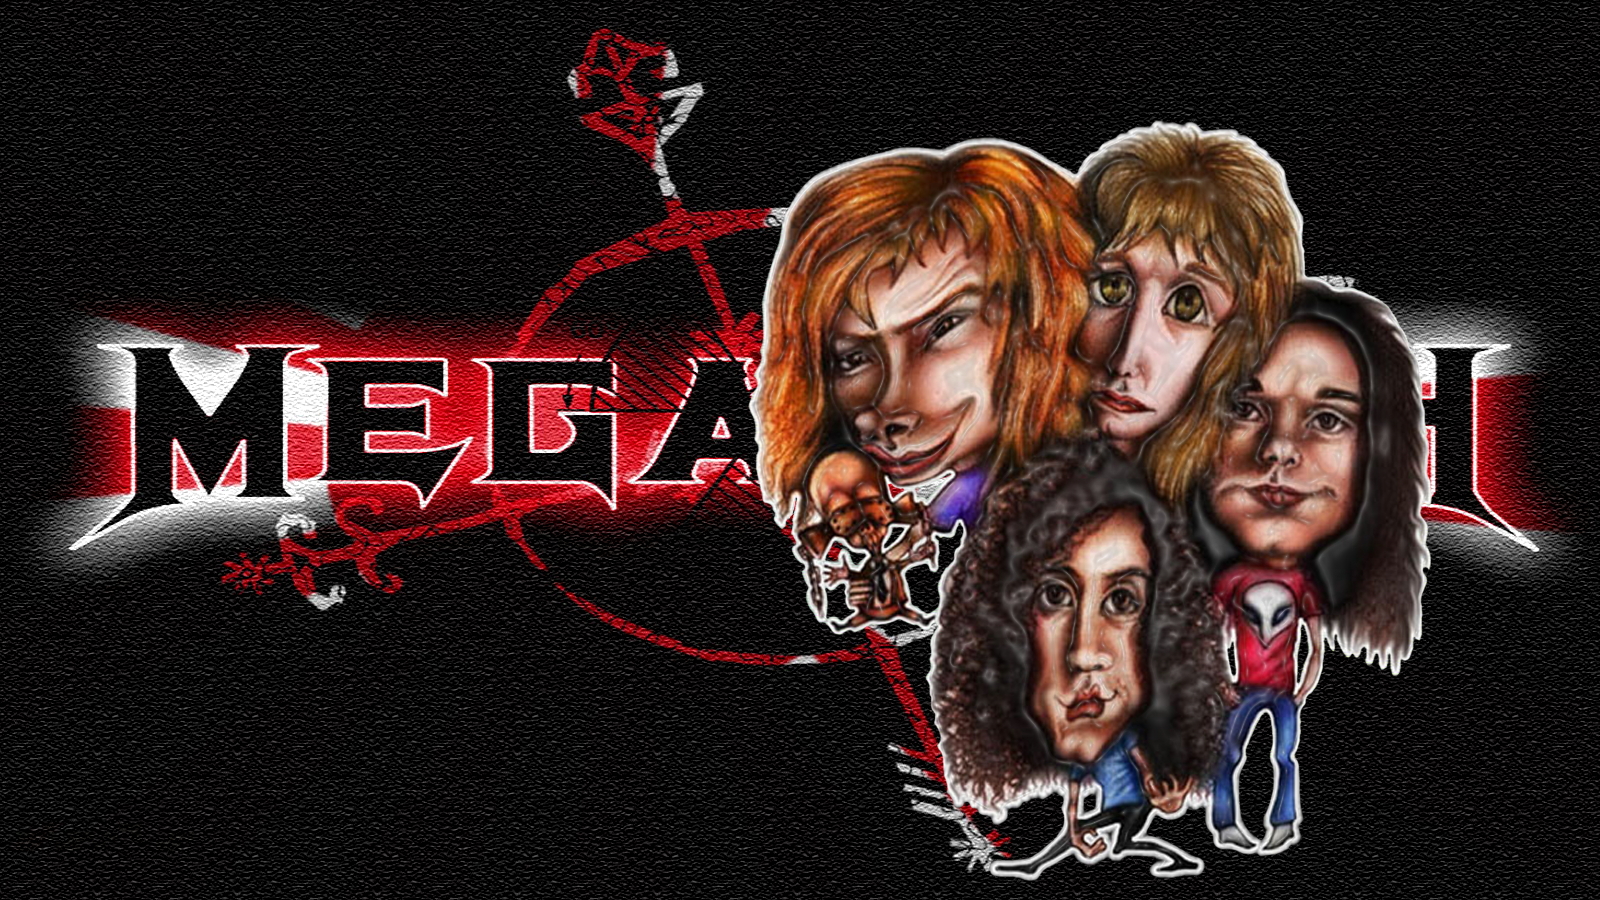 17 Megadeth HD Wallpapers | Backgrounds - Wallpaper Abyss